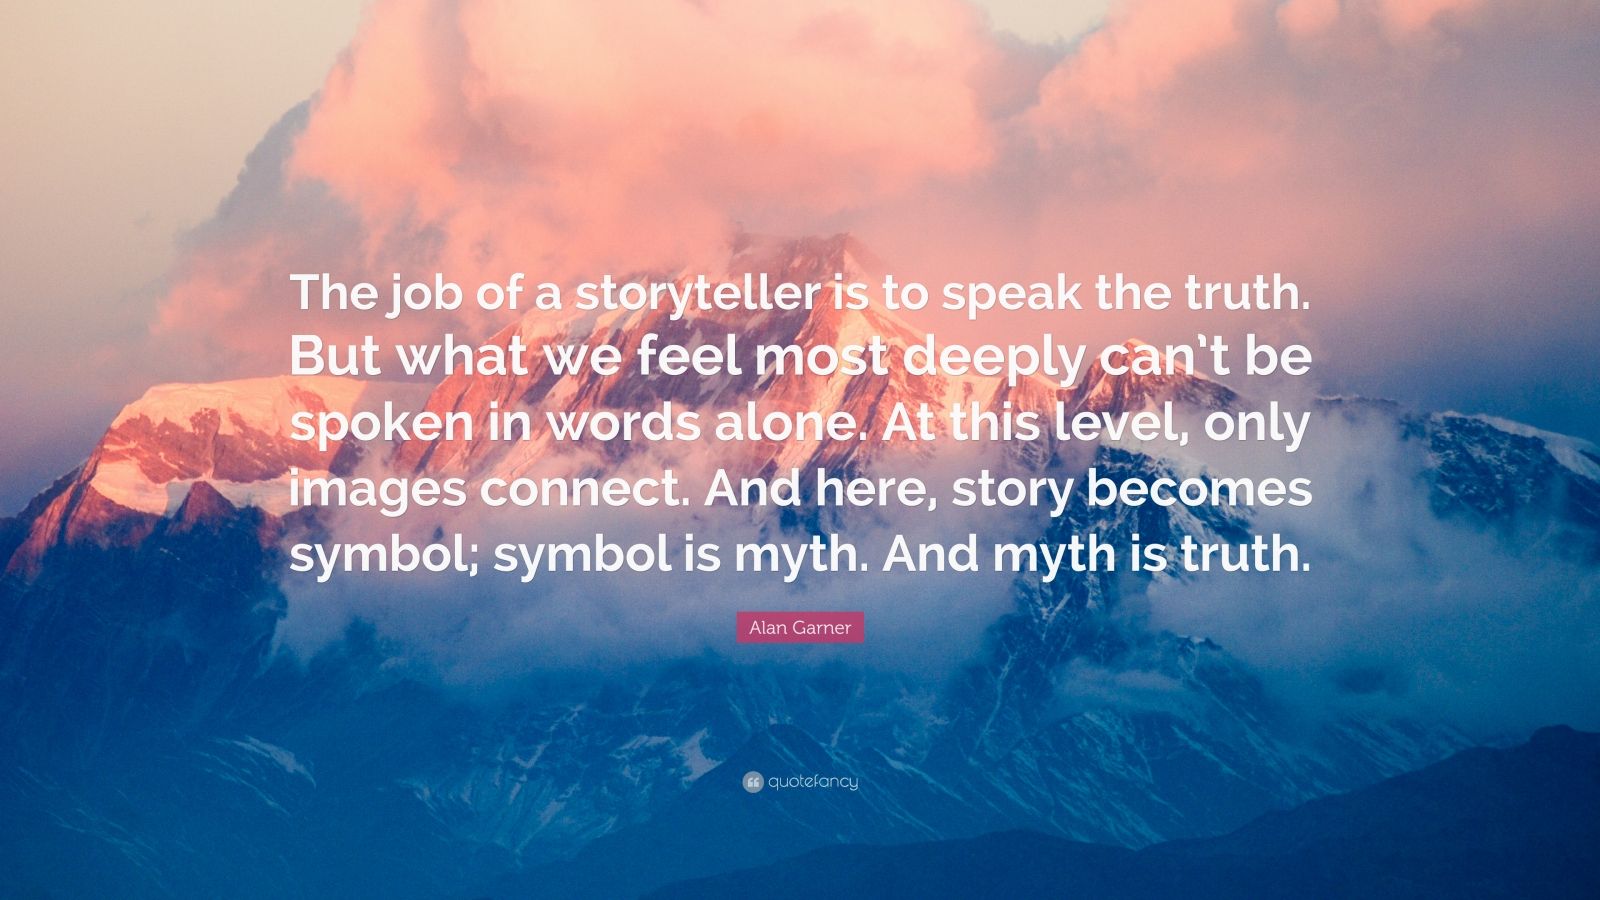 Alan Garner Quote: “The job of a storyteller is to speak the truth. But what we most deeply can't be spoken in words alone. At lev...”